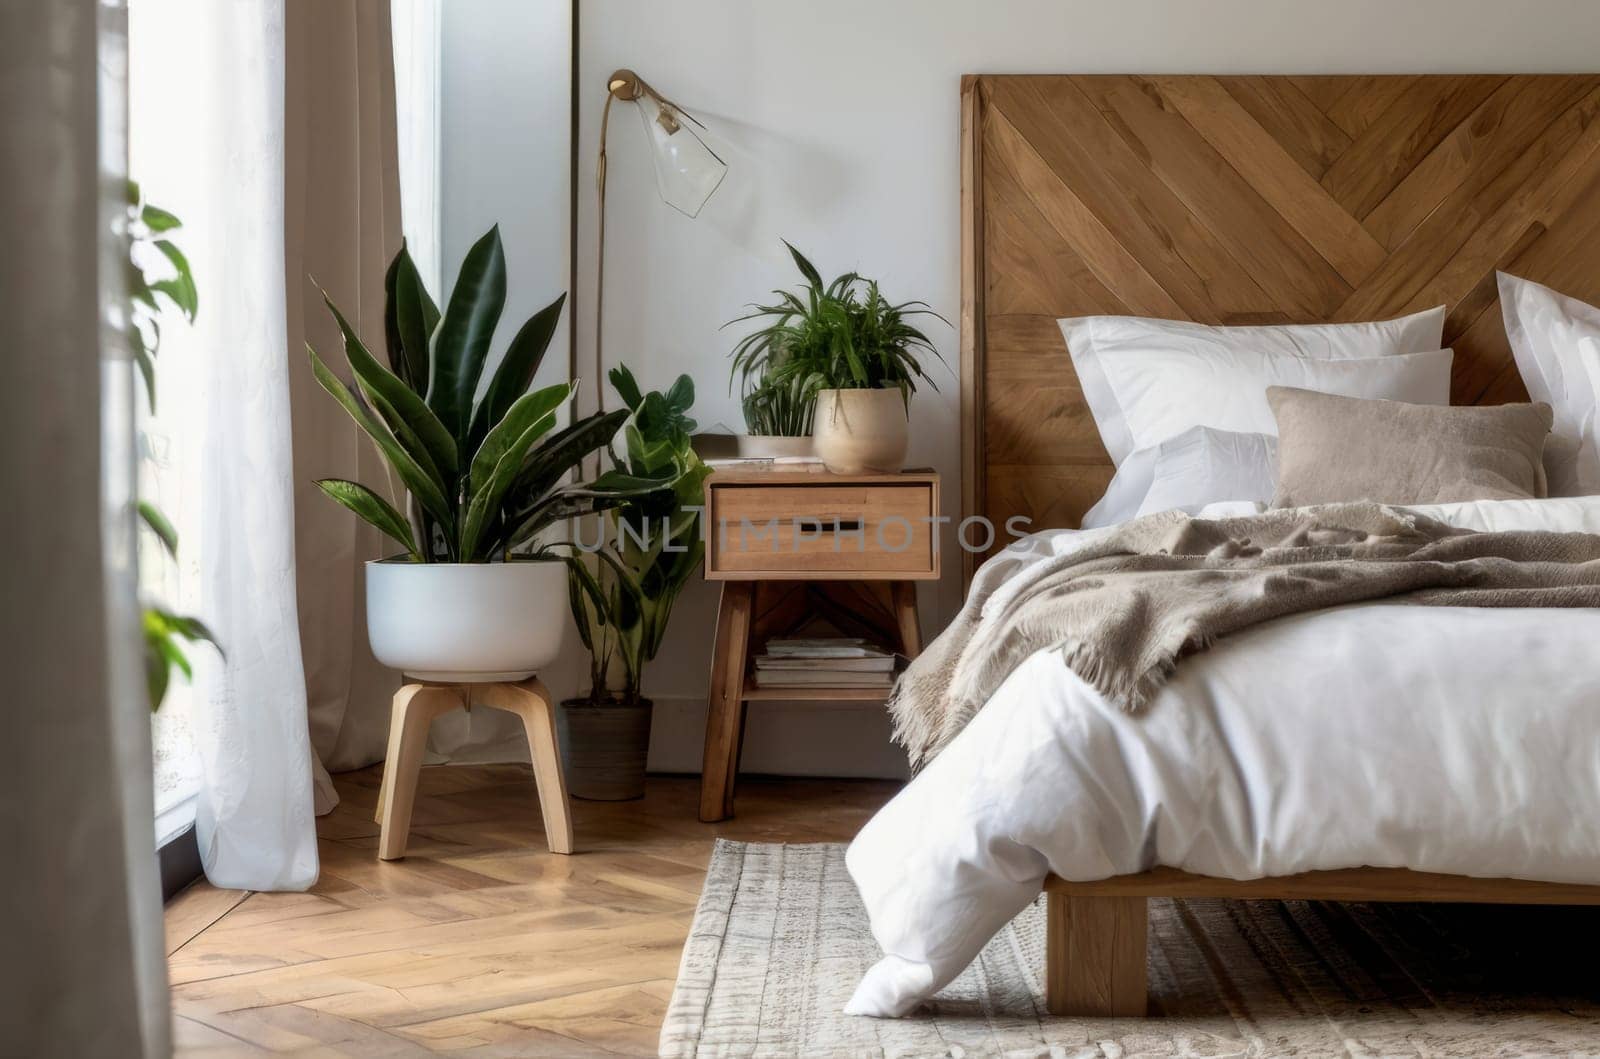 Peaceful setting in a home garden, bedroom in white-wood style. Close-up on bed, wooden parquet, and abundance of greenery. Interior design inspired by urban jungles. Biophilia concept. by Annu1tochka